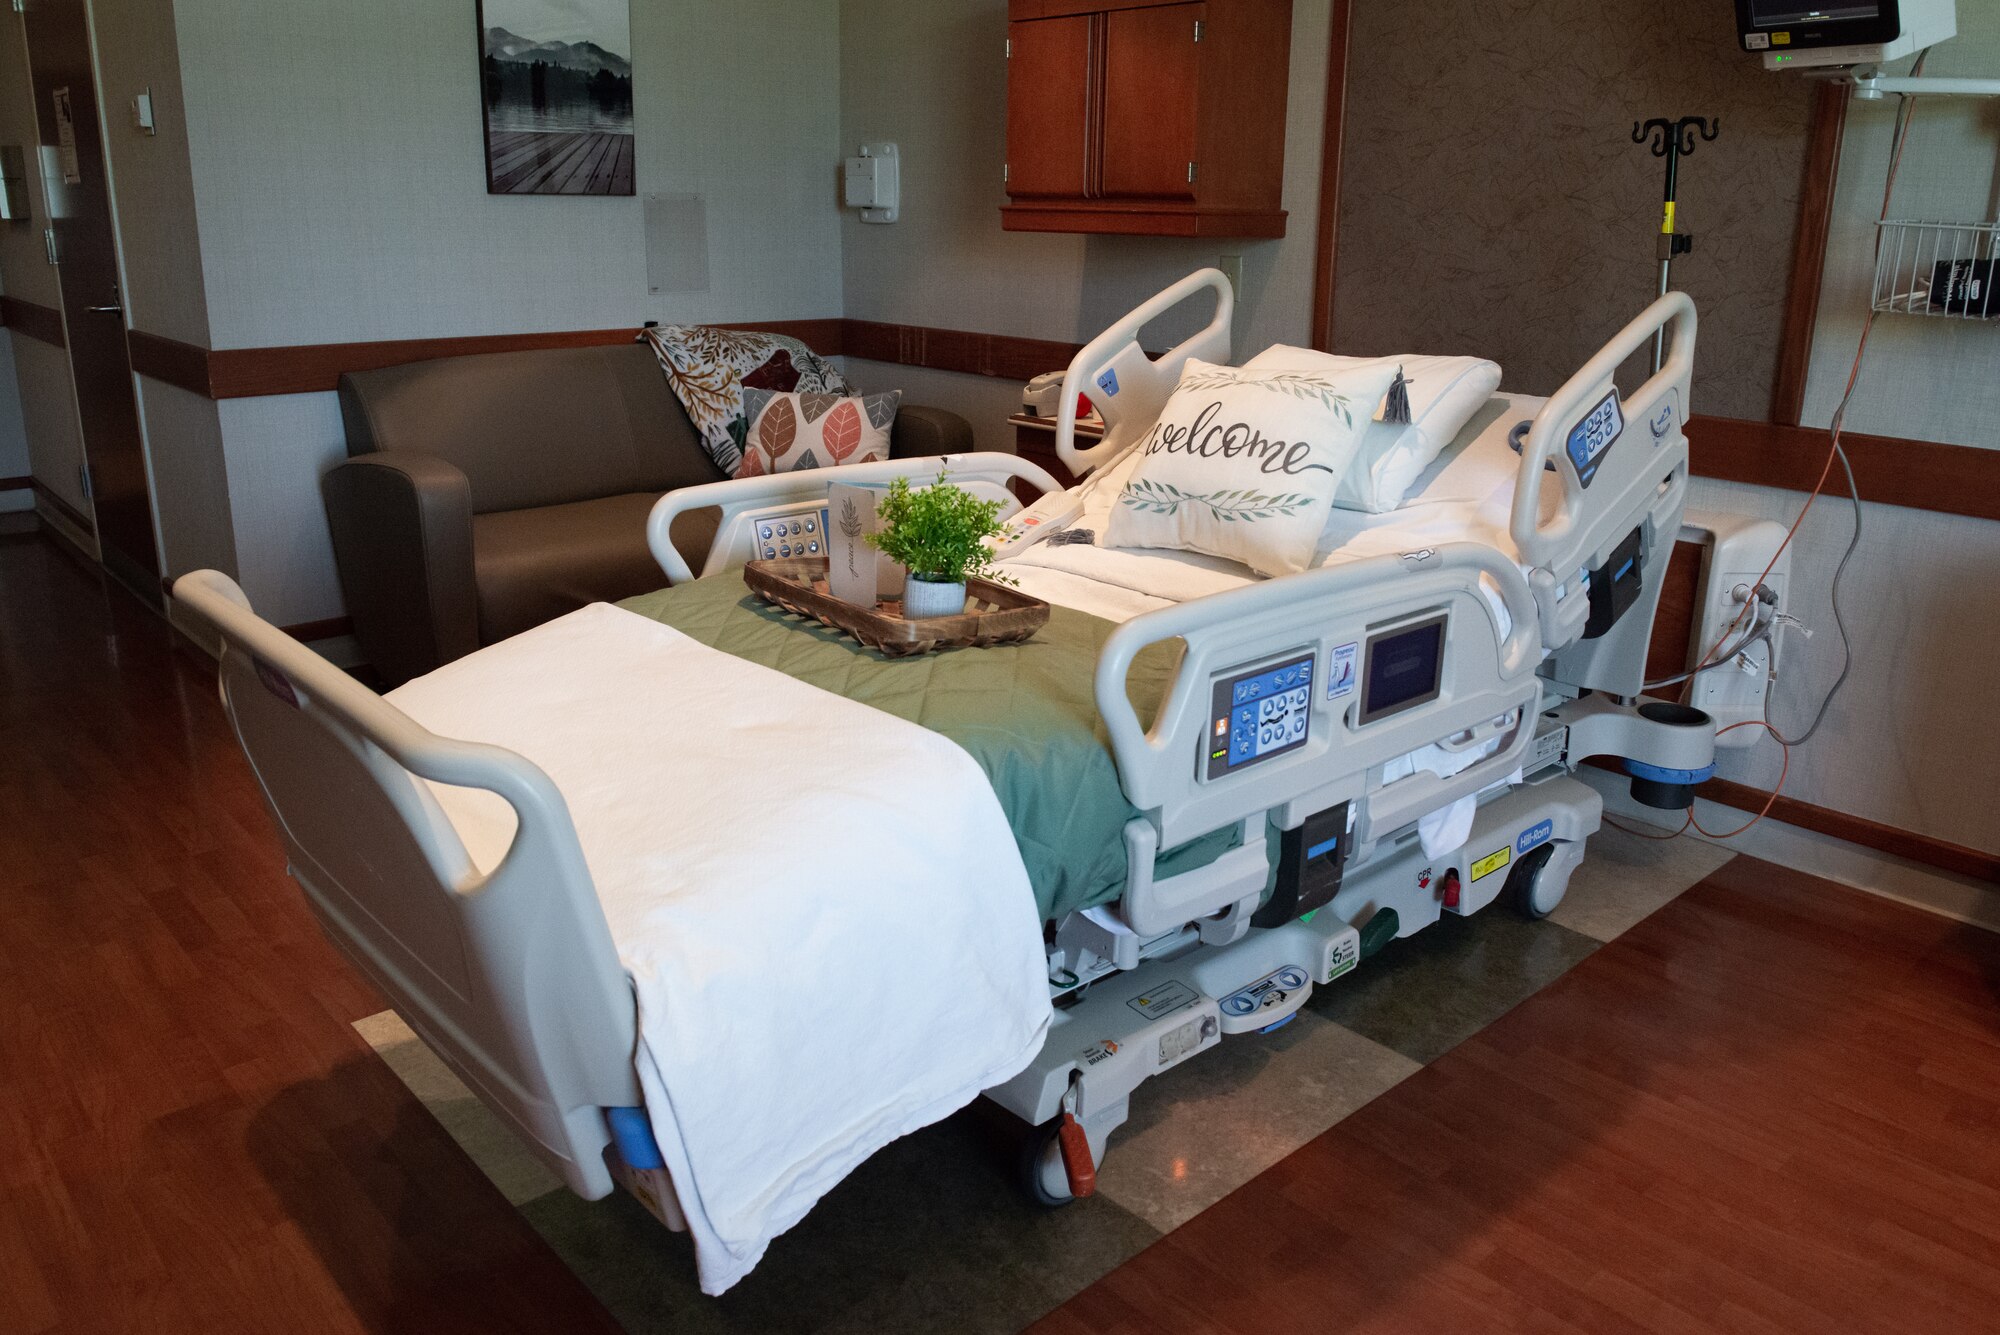 A hospital room furnished with decorative items and a personalized bed